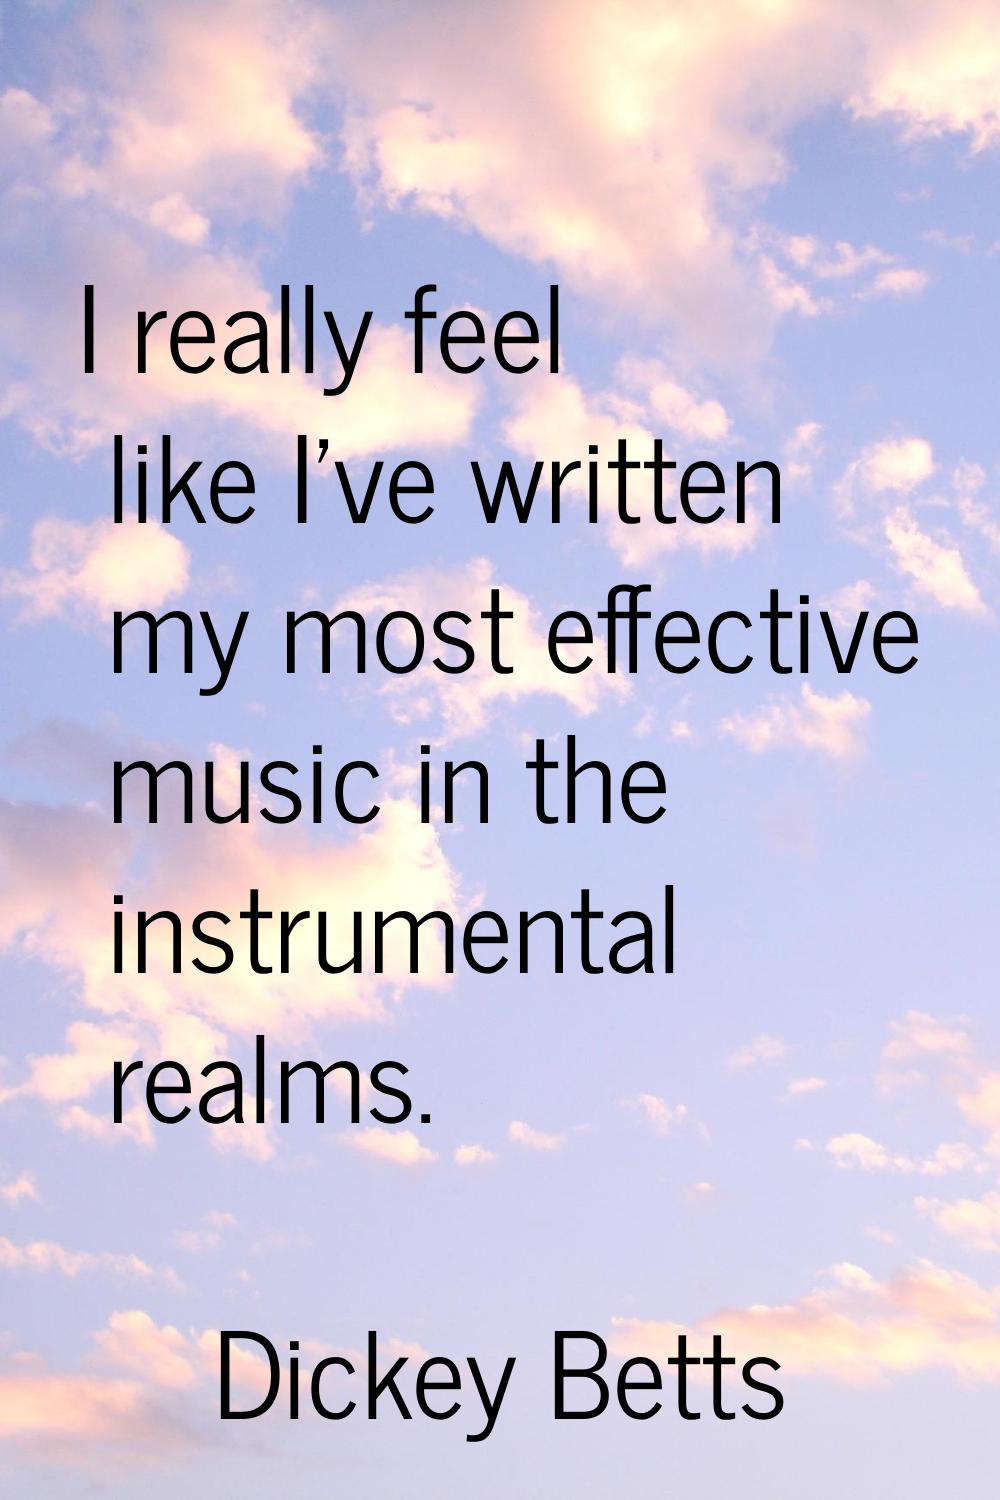 I really feel like I've written my most effective music in the instrumental realms.